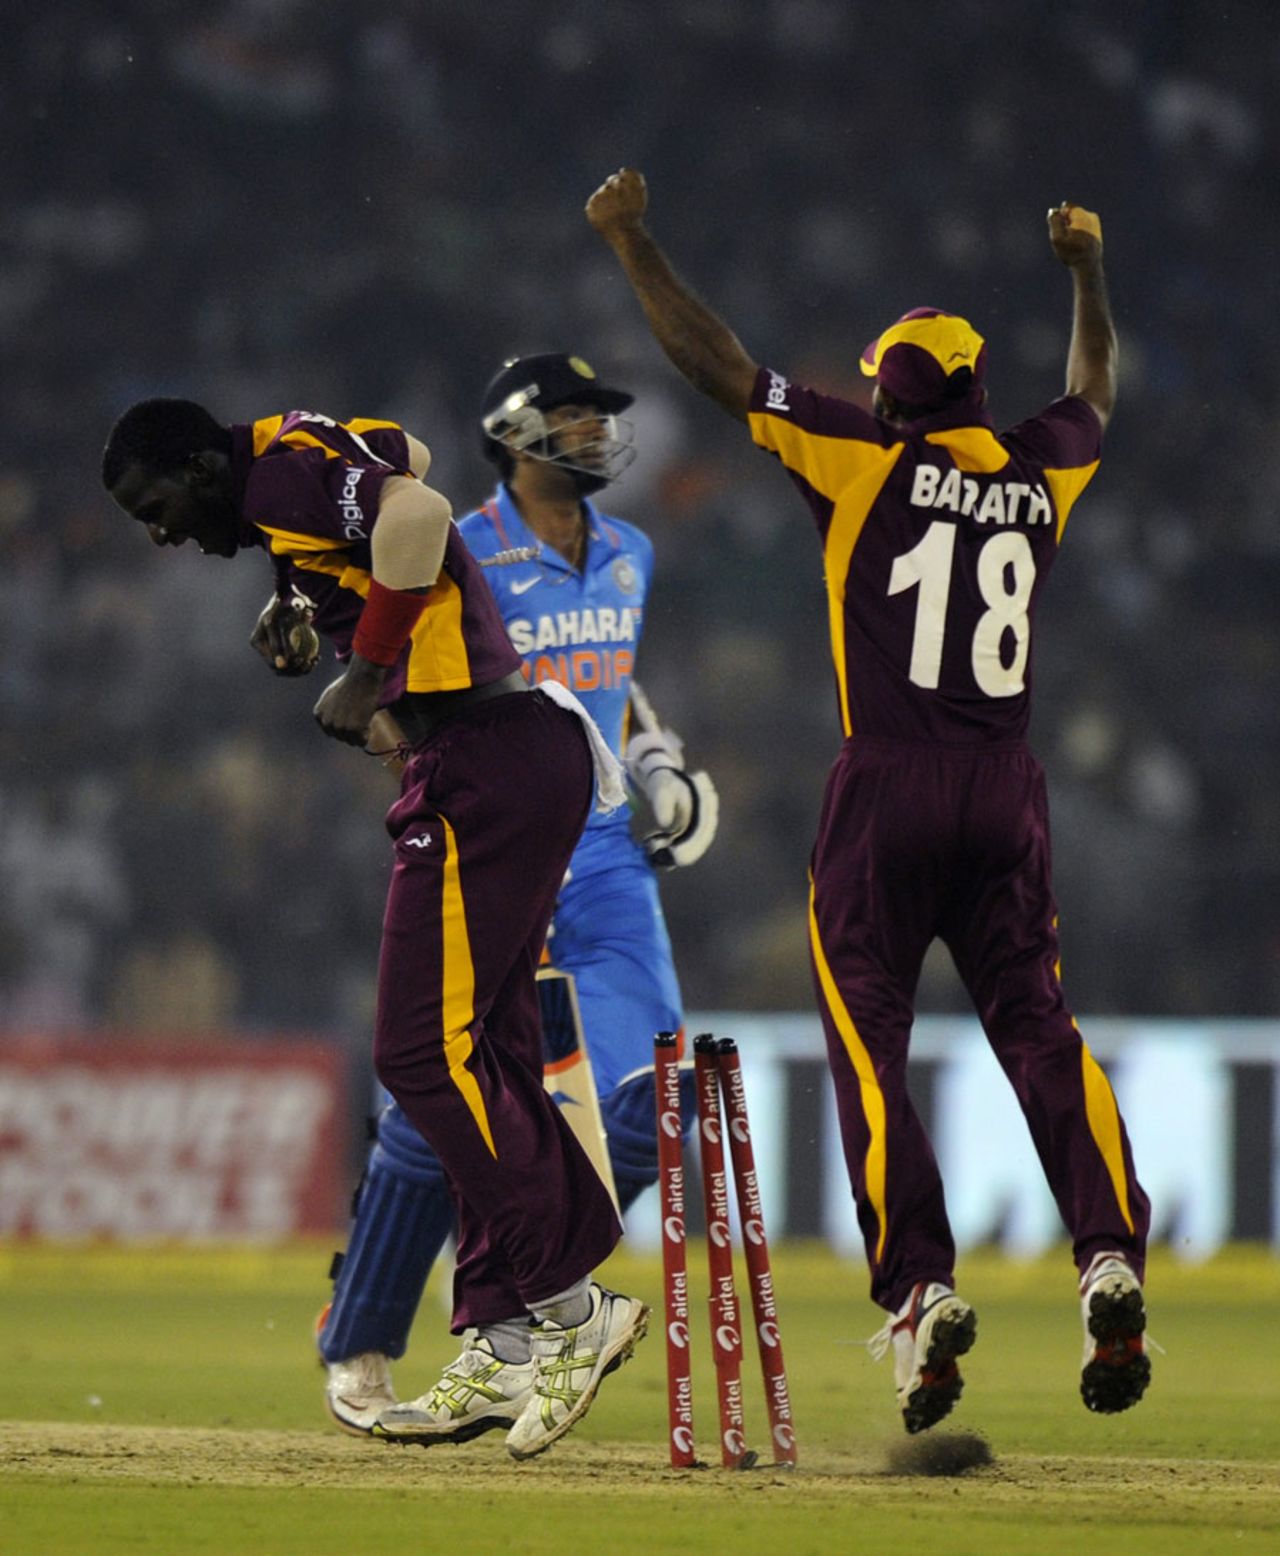 West Indies are thrilled after dismissing Rohit Sharma, India v West Indies, 1st ODI, Cuttack, November 29, 2011